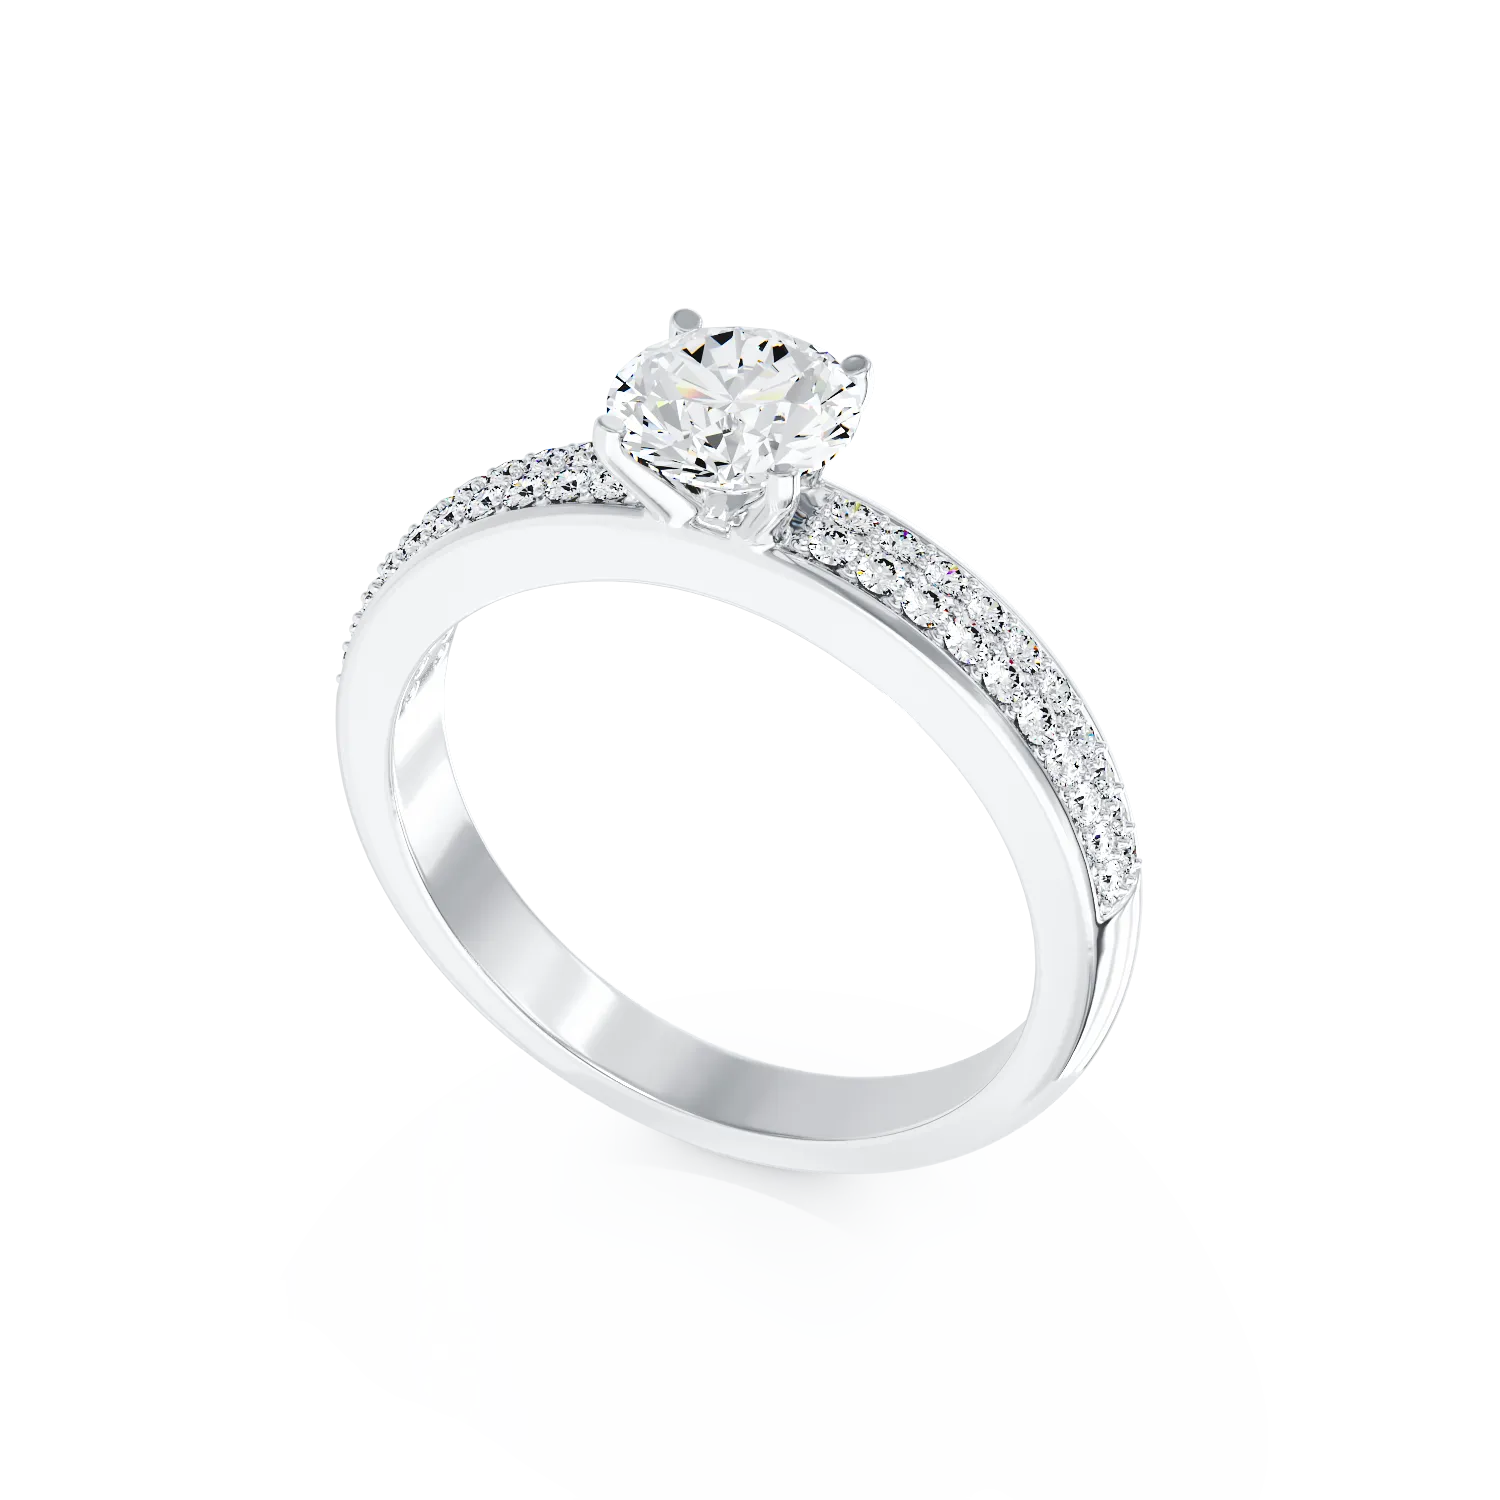 18K white gold engagement ring with 0.6ct diamond and 0.2ct diamonds